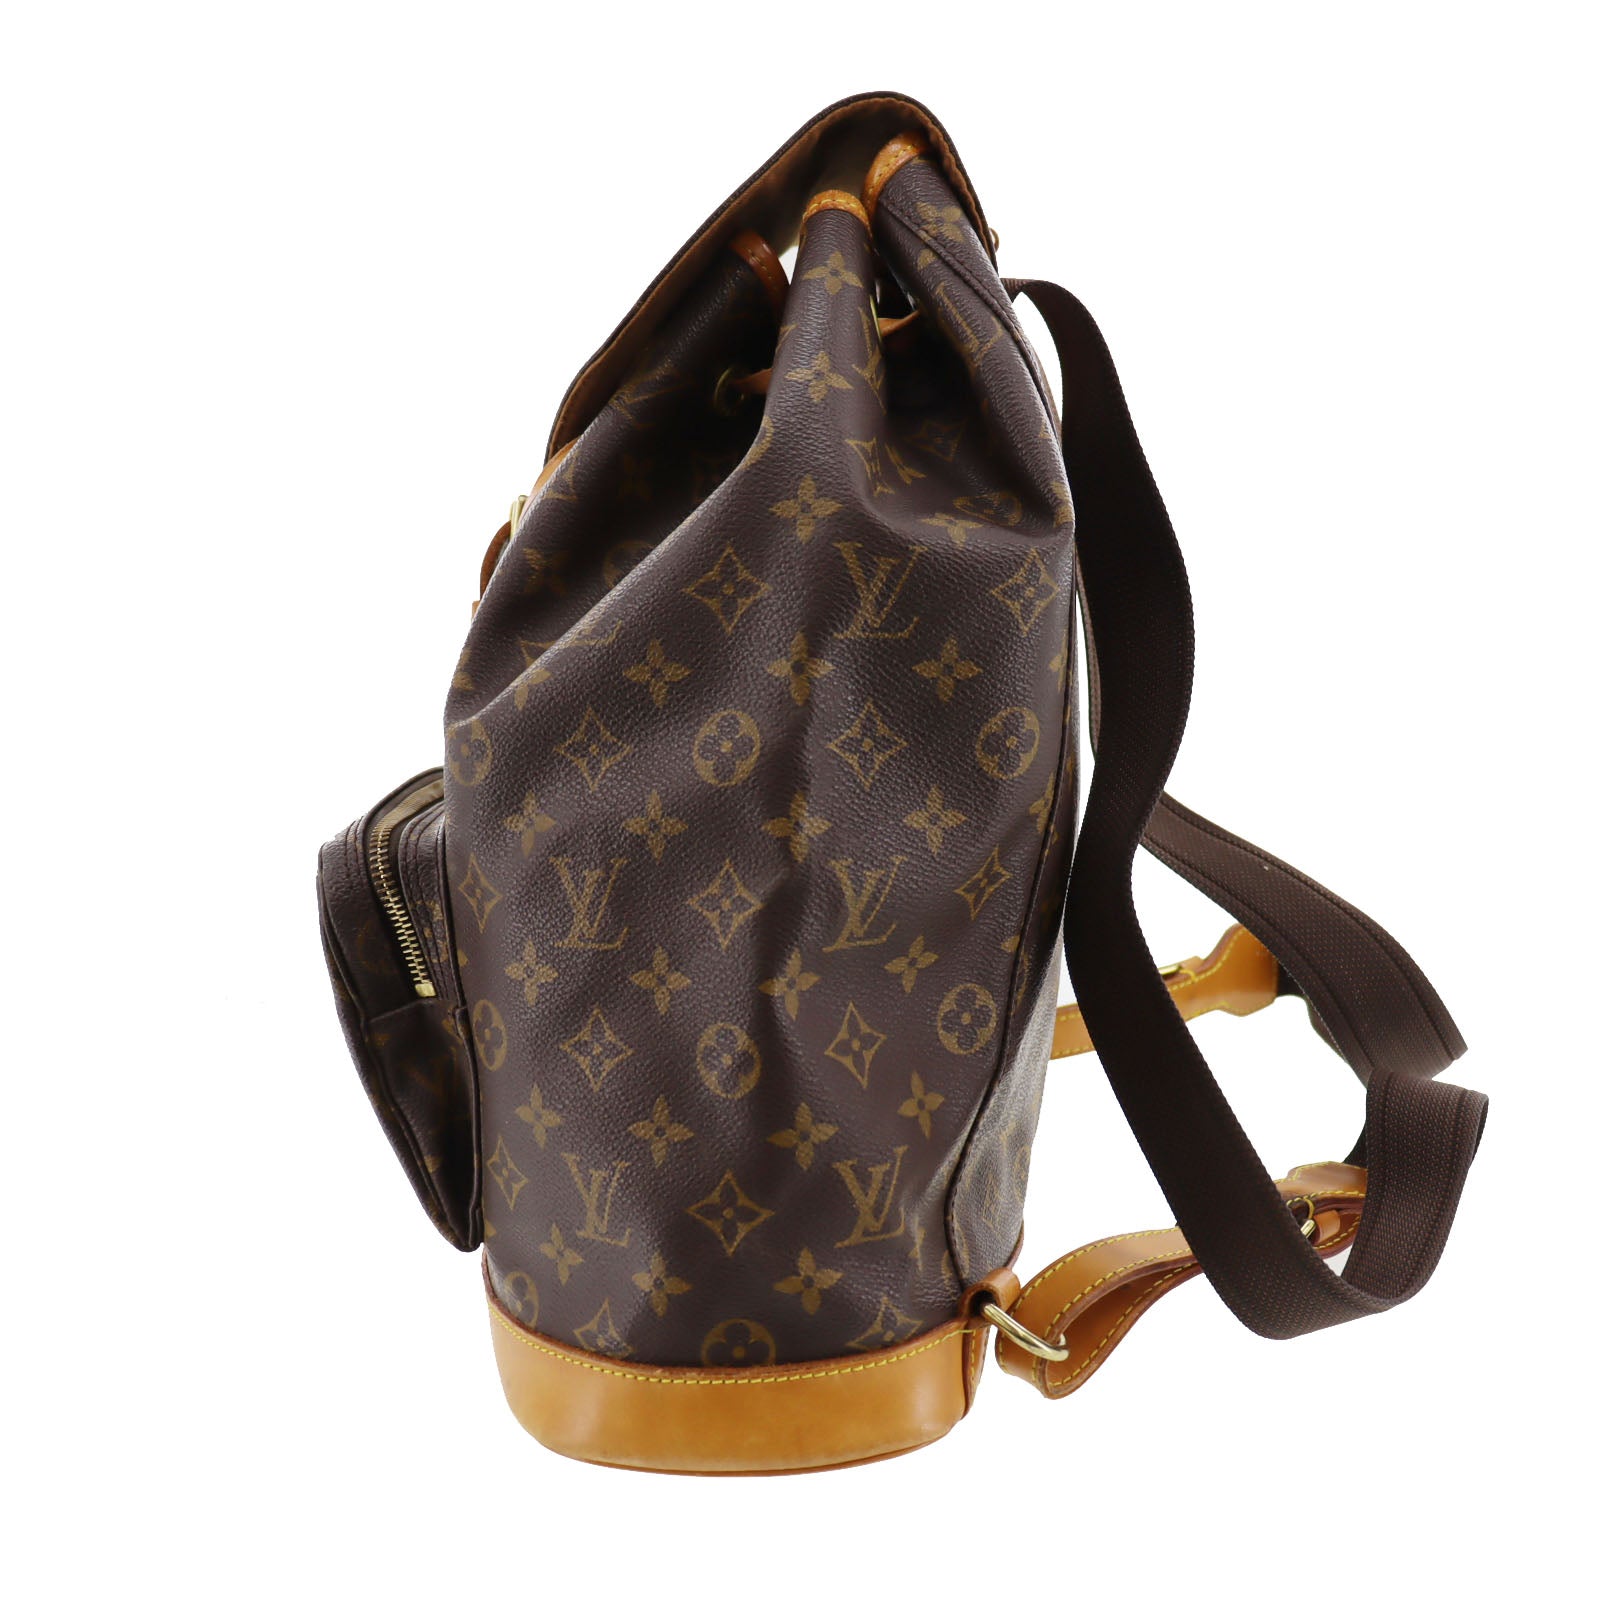 The Louis Vuitton Backpack Is Back